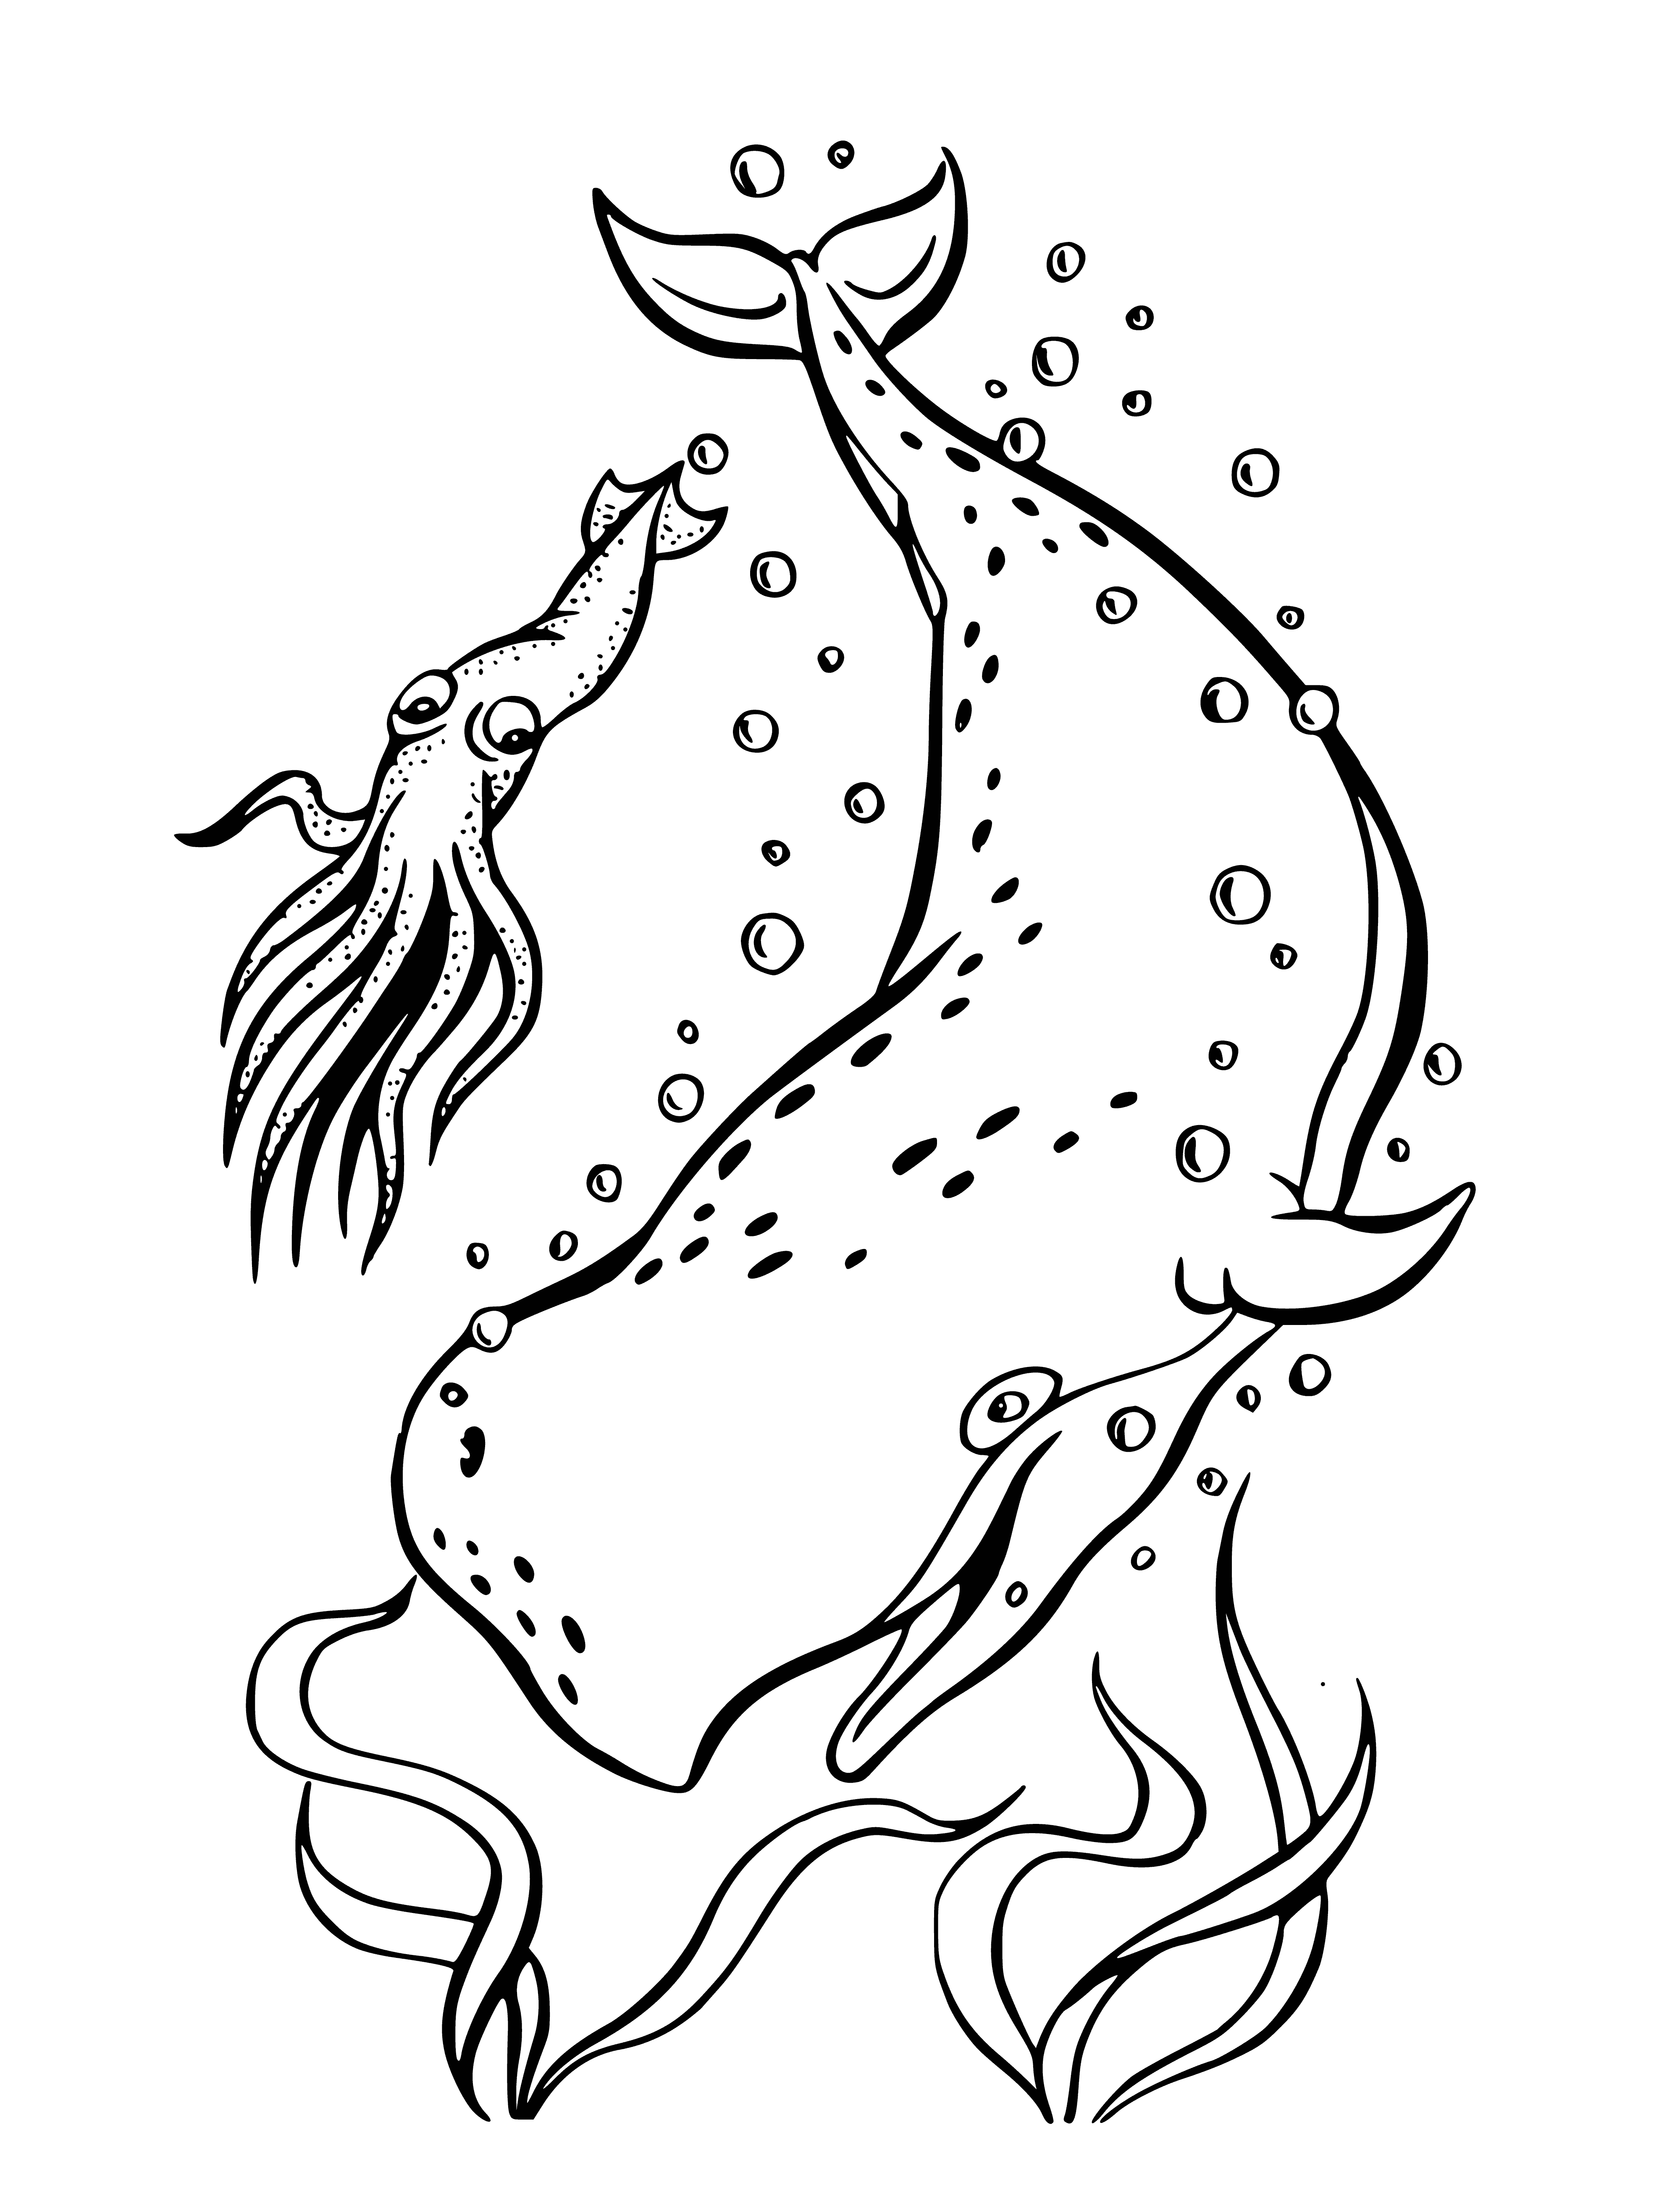 coloring page: Girl in pink dress and purple shoes fishes at the water's edge. Mer-creature in the water captures her attention.